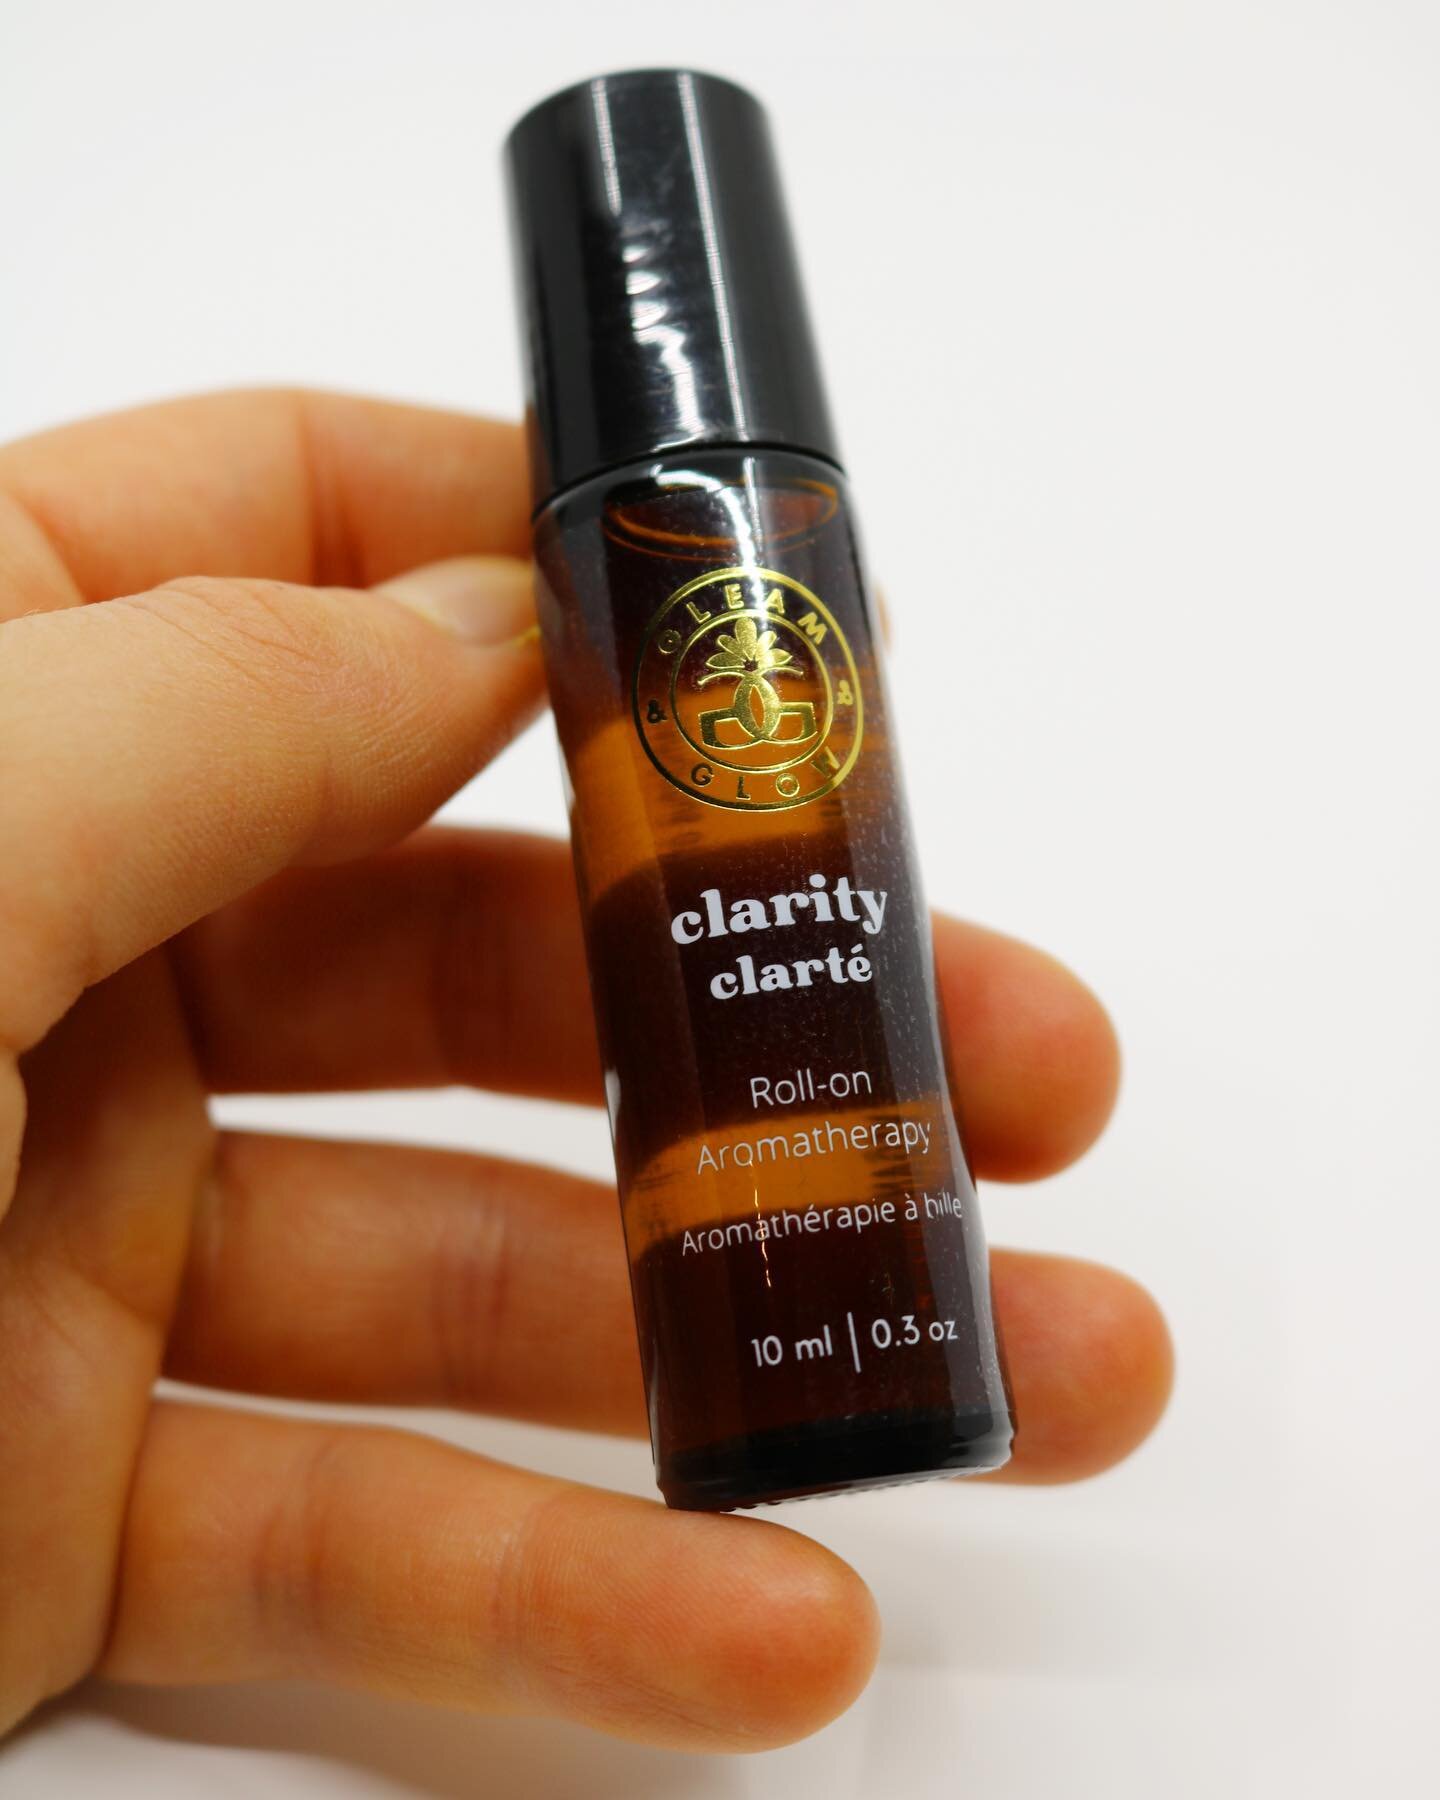 ⚡️PRODUCT DROP⚡️

Introducing the Clarity Aromatherapy Roll-On 🌱

GLEAM &amp; GLOW's pure essential oil roll-ons use high quality unadulterated essential oils in jojoba oil carrier oil. 

Carefully formulated with the following essential oils:

🍋 L